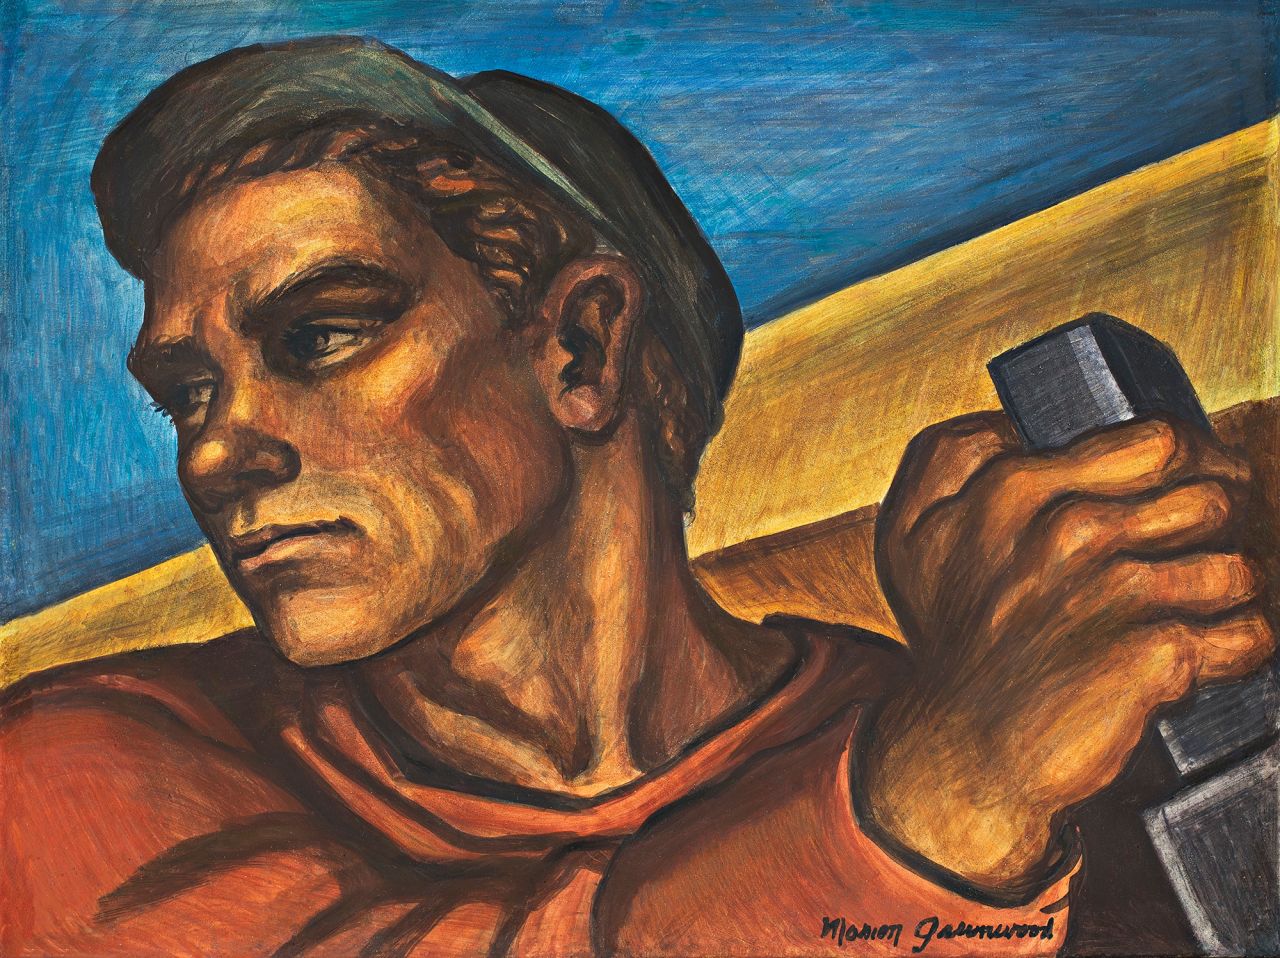 "Construction Worker" (1940) by Marion Greenwood.  